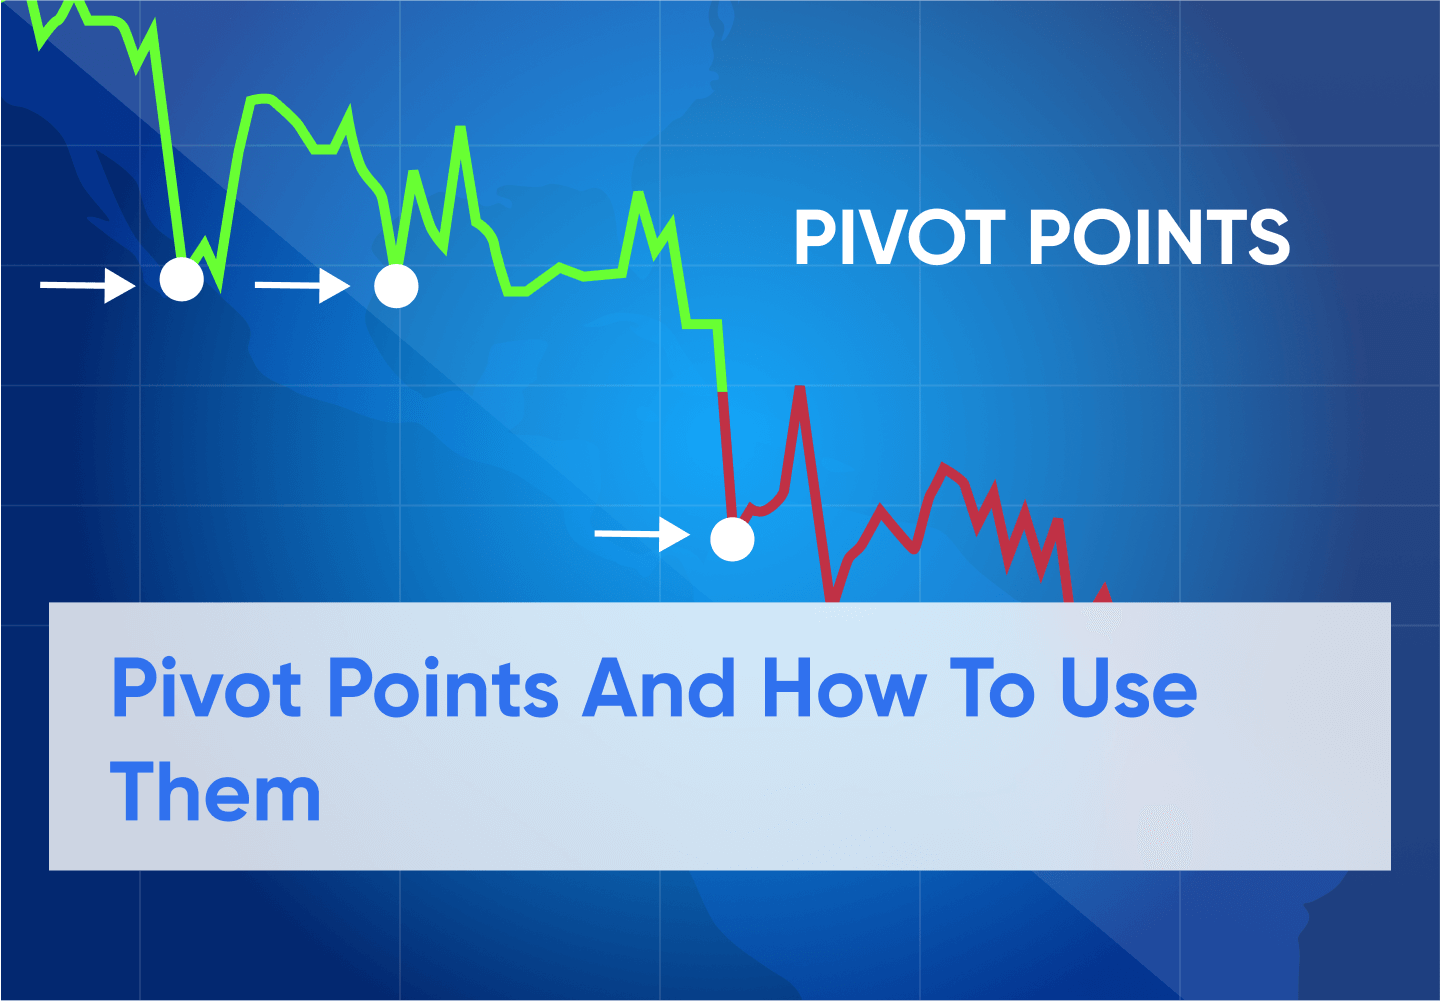 What is a Pivot Point?